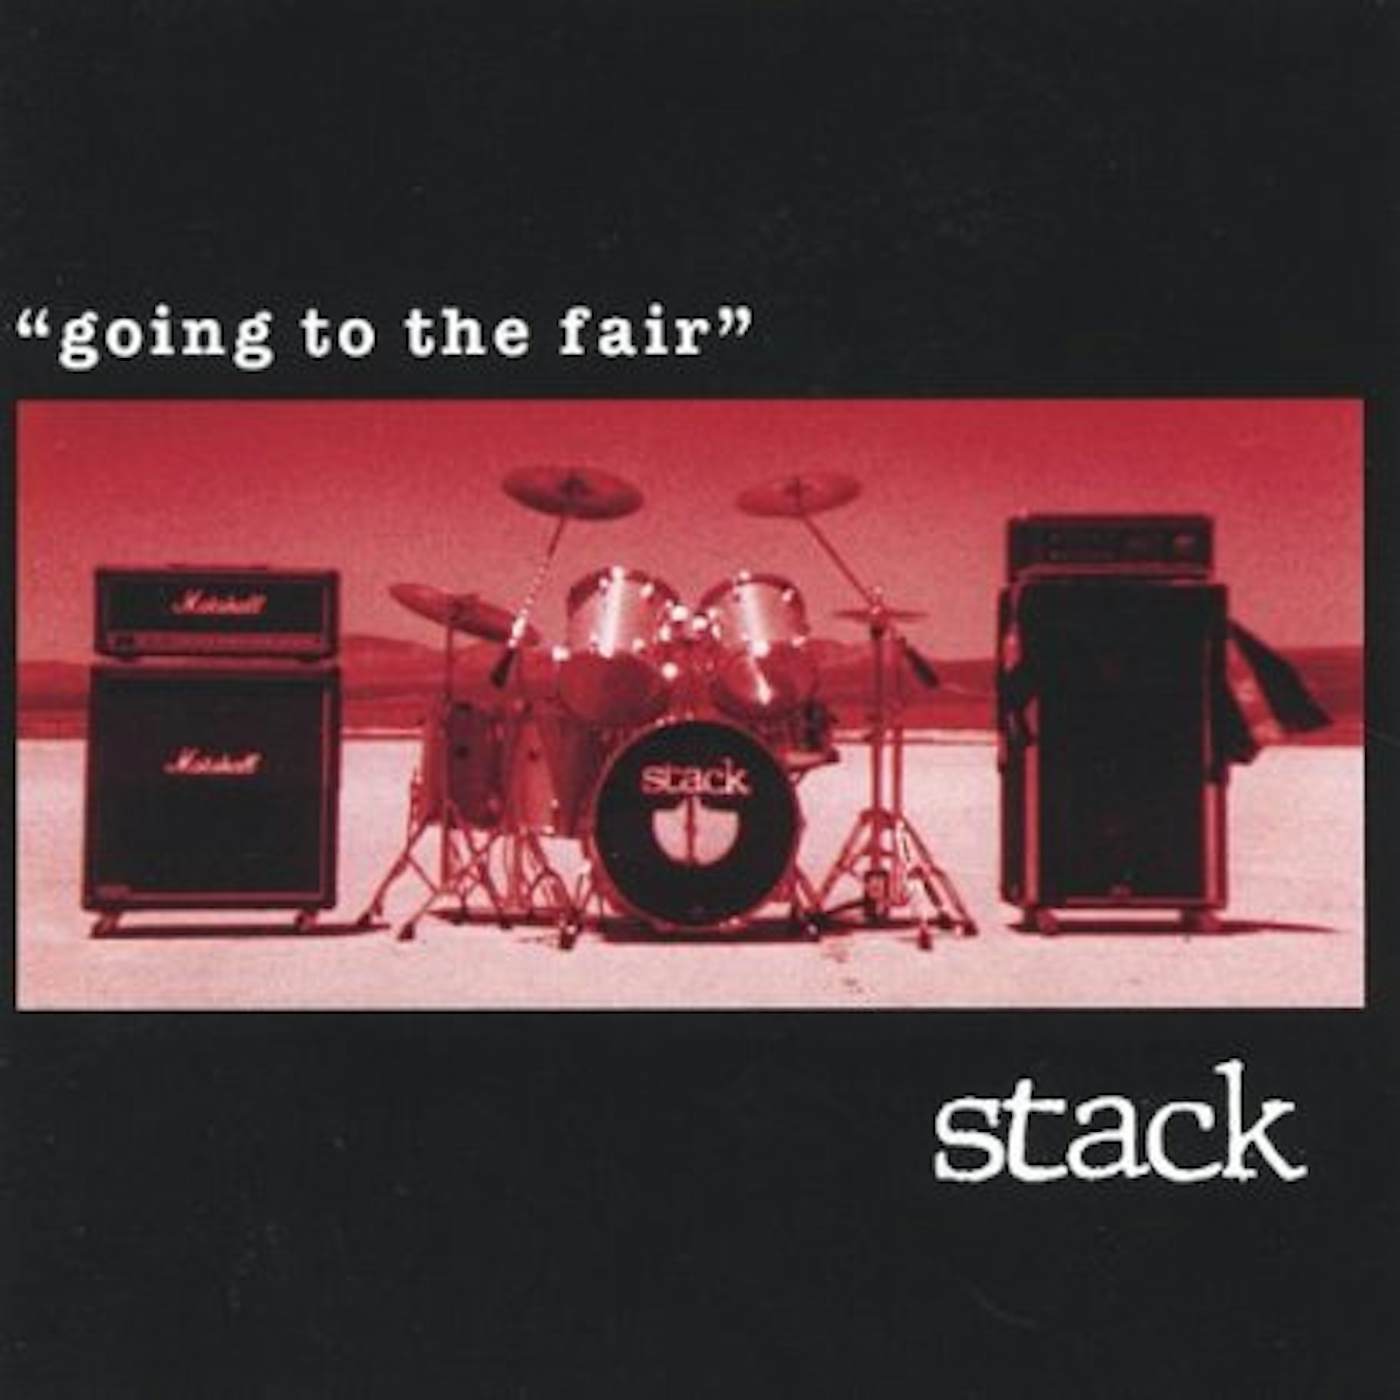 Stack GOING TO THE FAIR CD